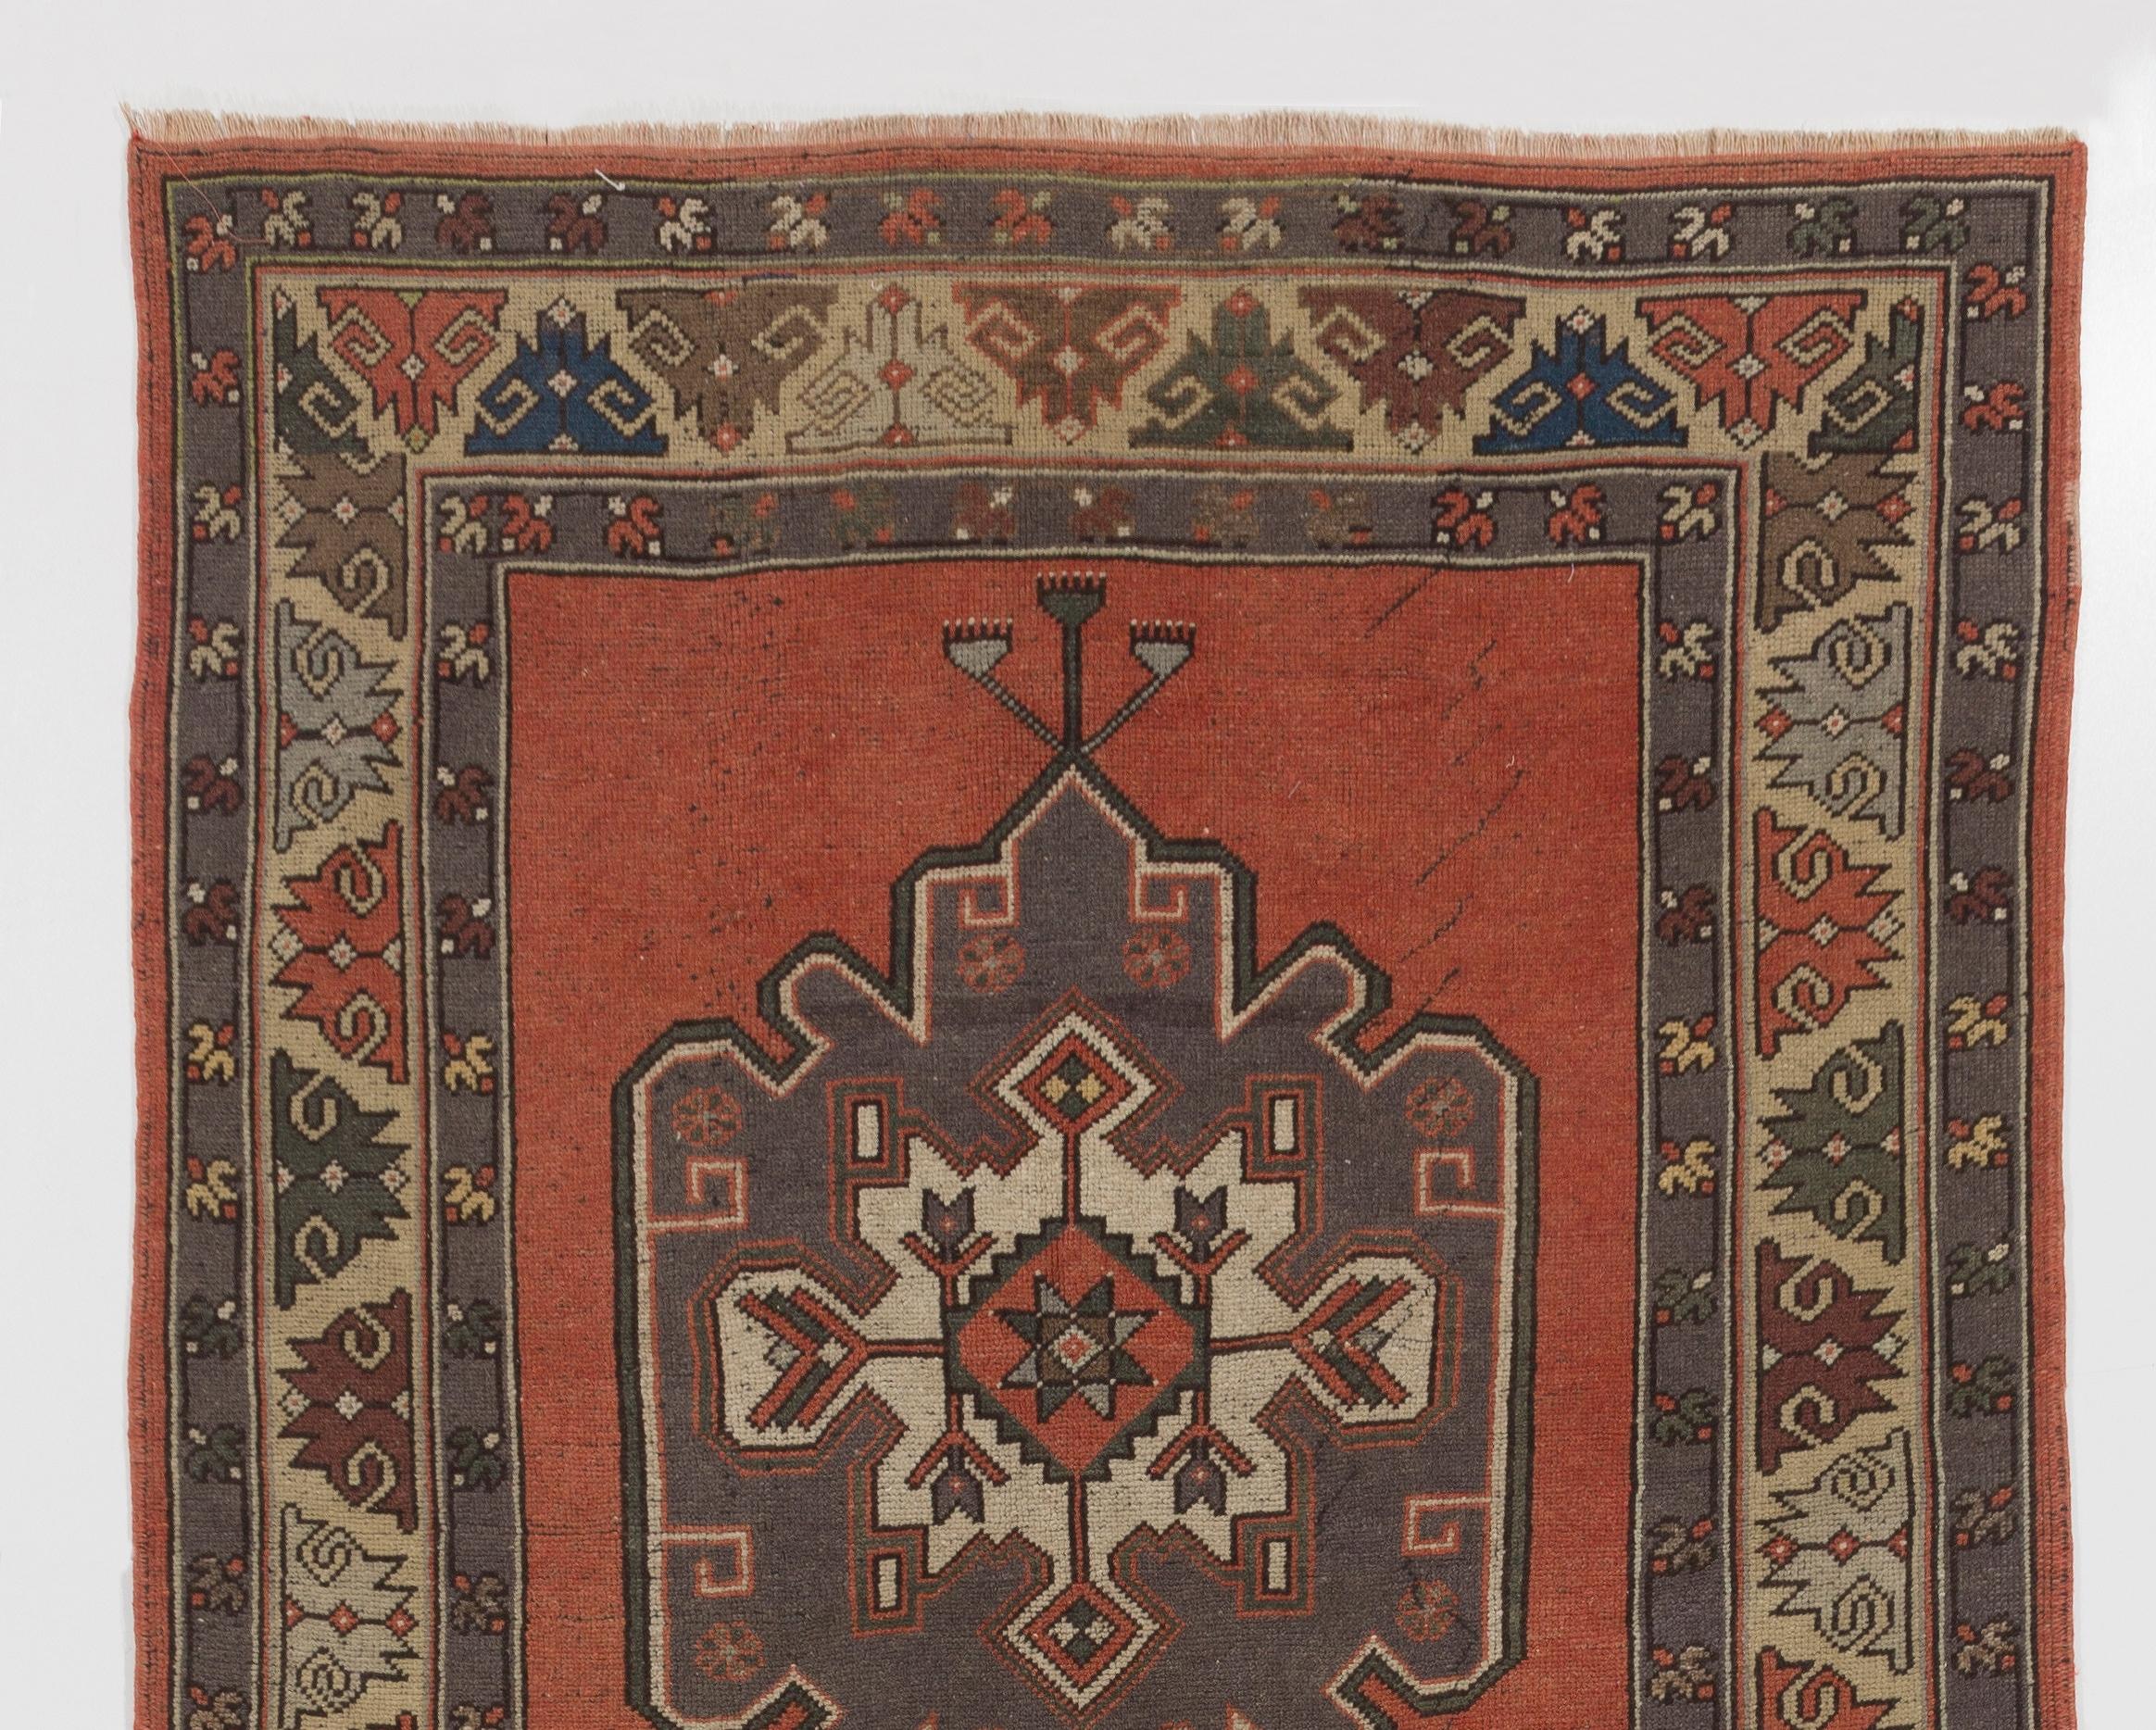 This is a vintage hand knotted Turkish runner featuring three linked medallions in gray against a plain field in warm burnt orange/terra-cotta. The guard strips and the main border take up a large space and are decorated with abstract floral motifs